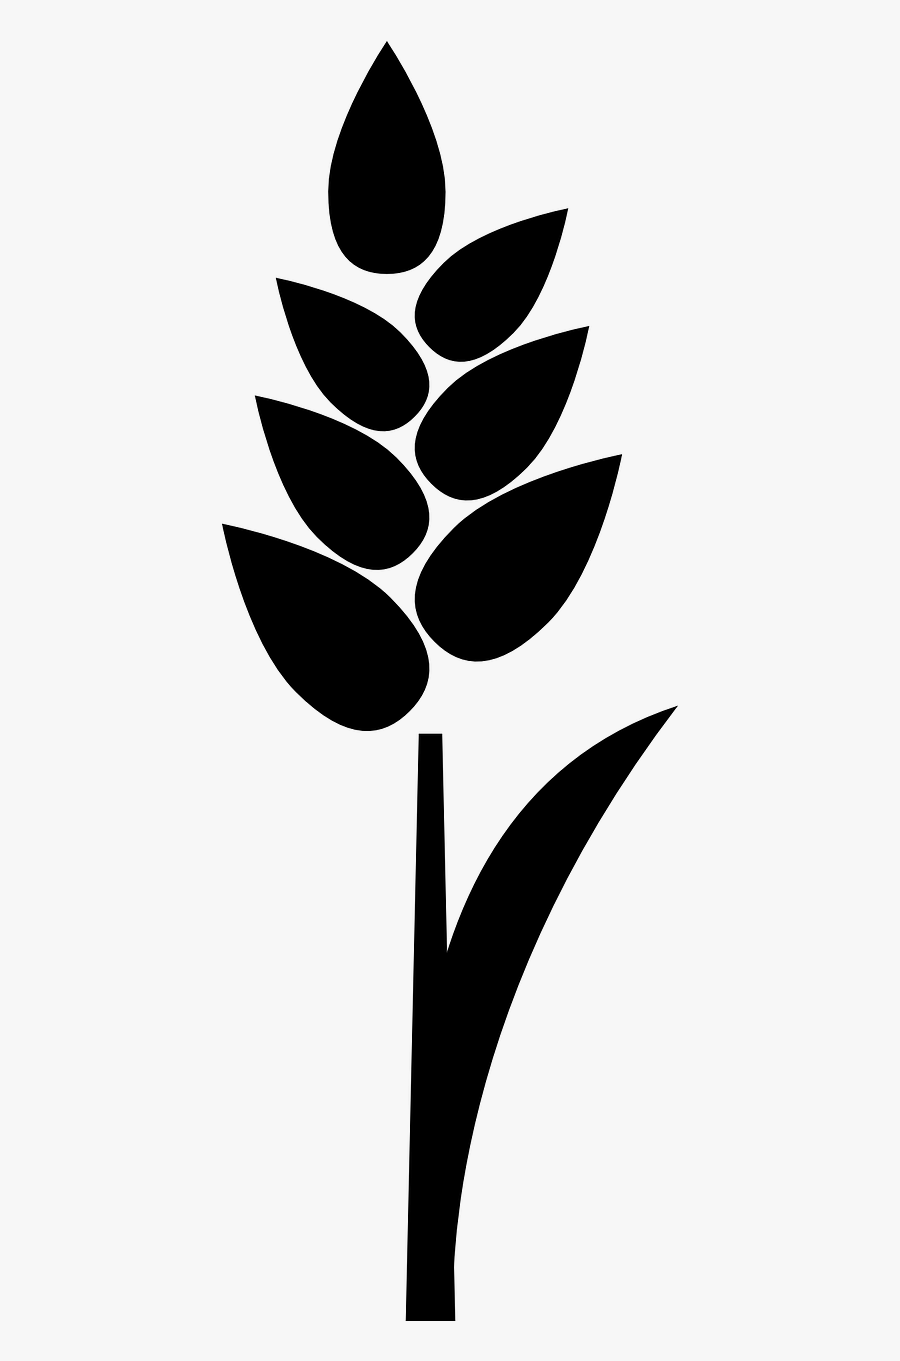 Wheat Plant Silhouette Free Picture - Rice Silhouette Png, Transparent Clipart